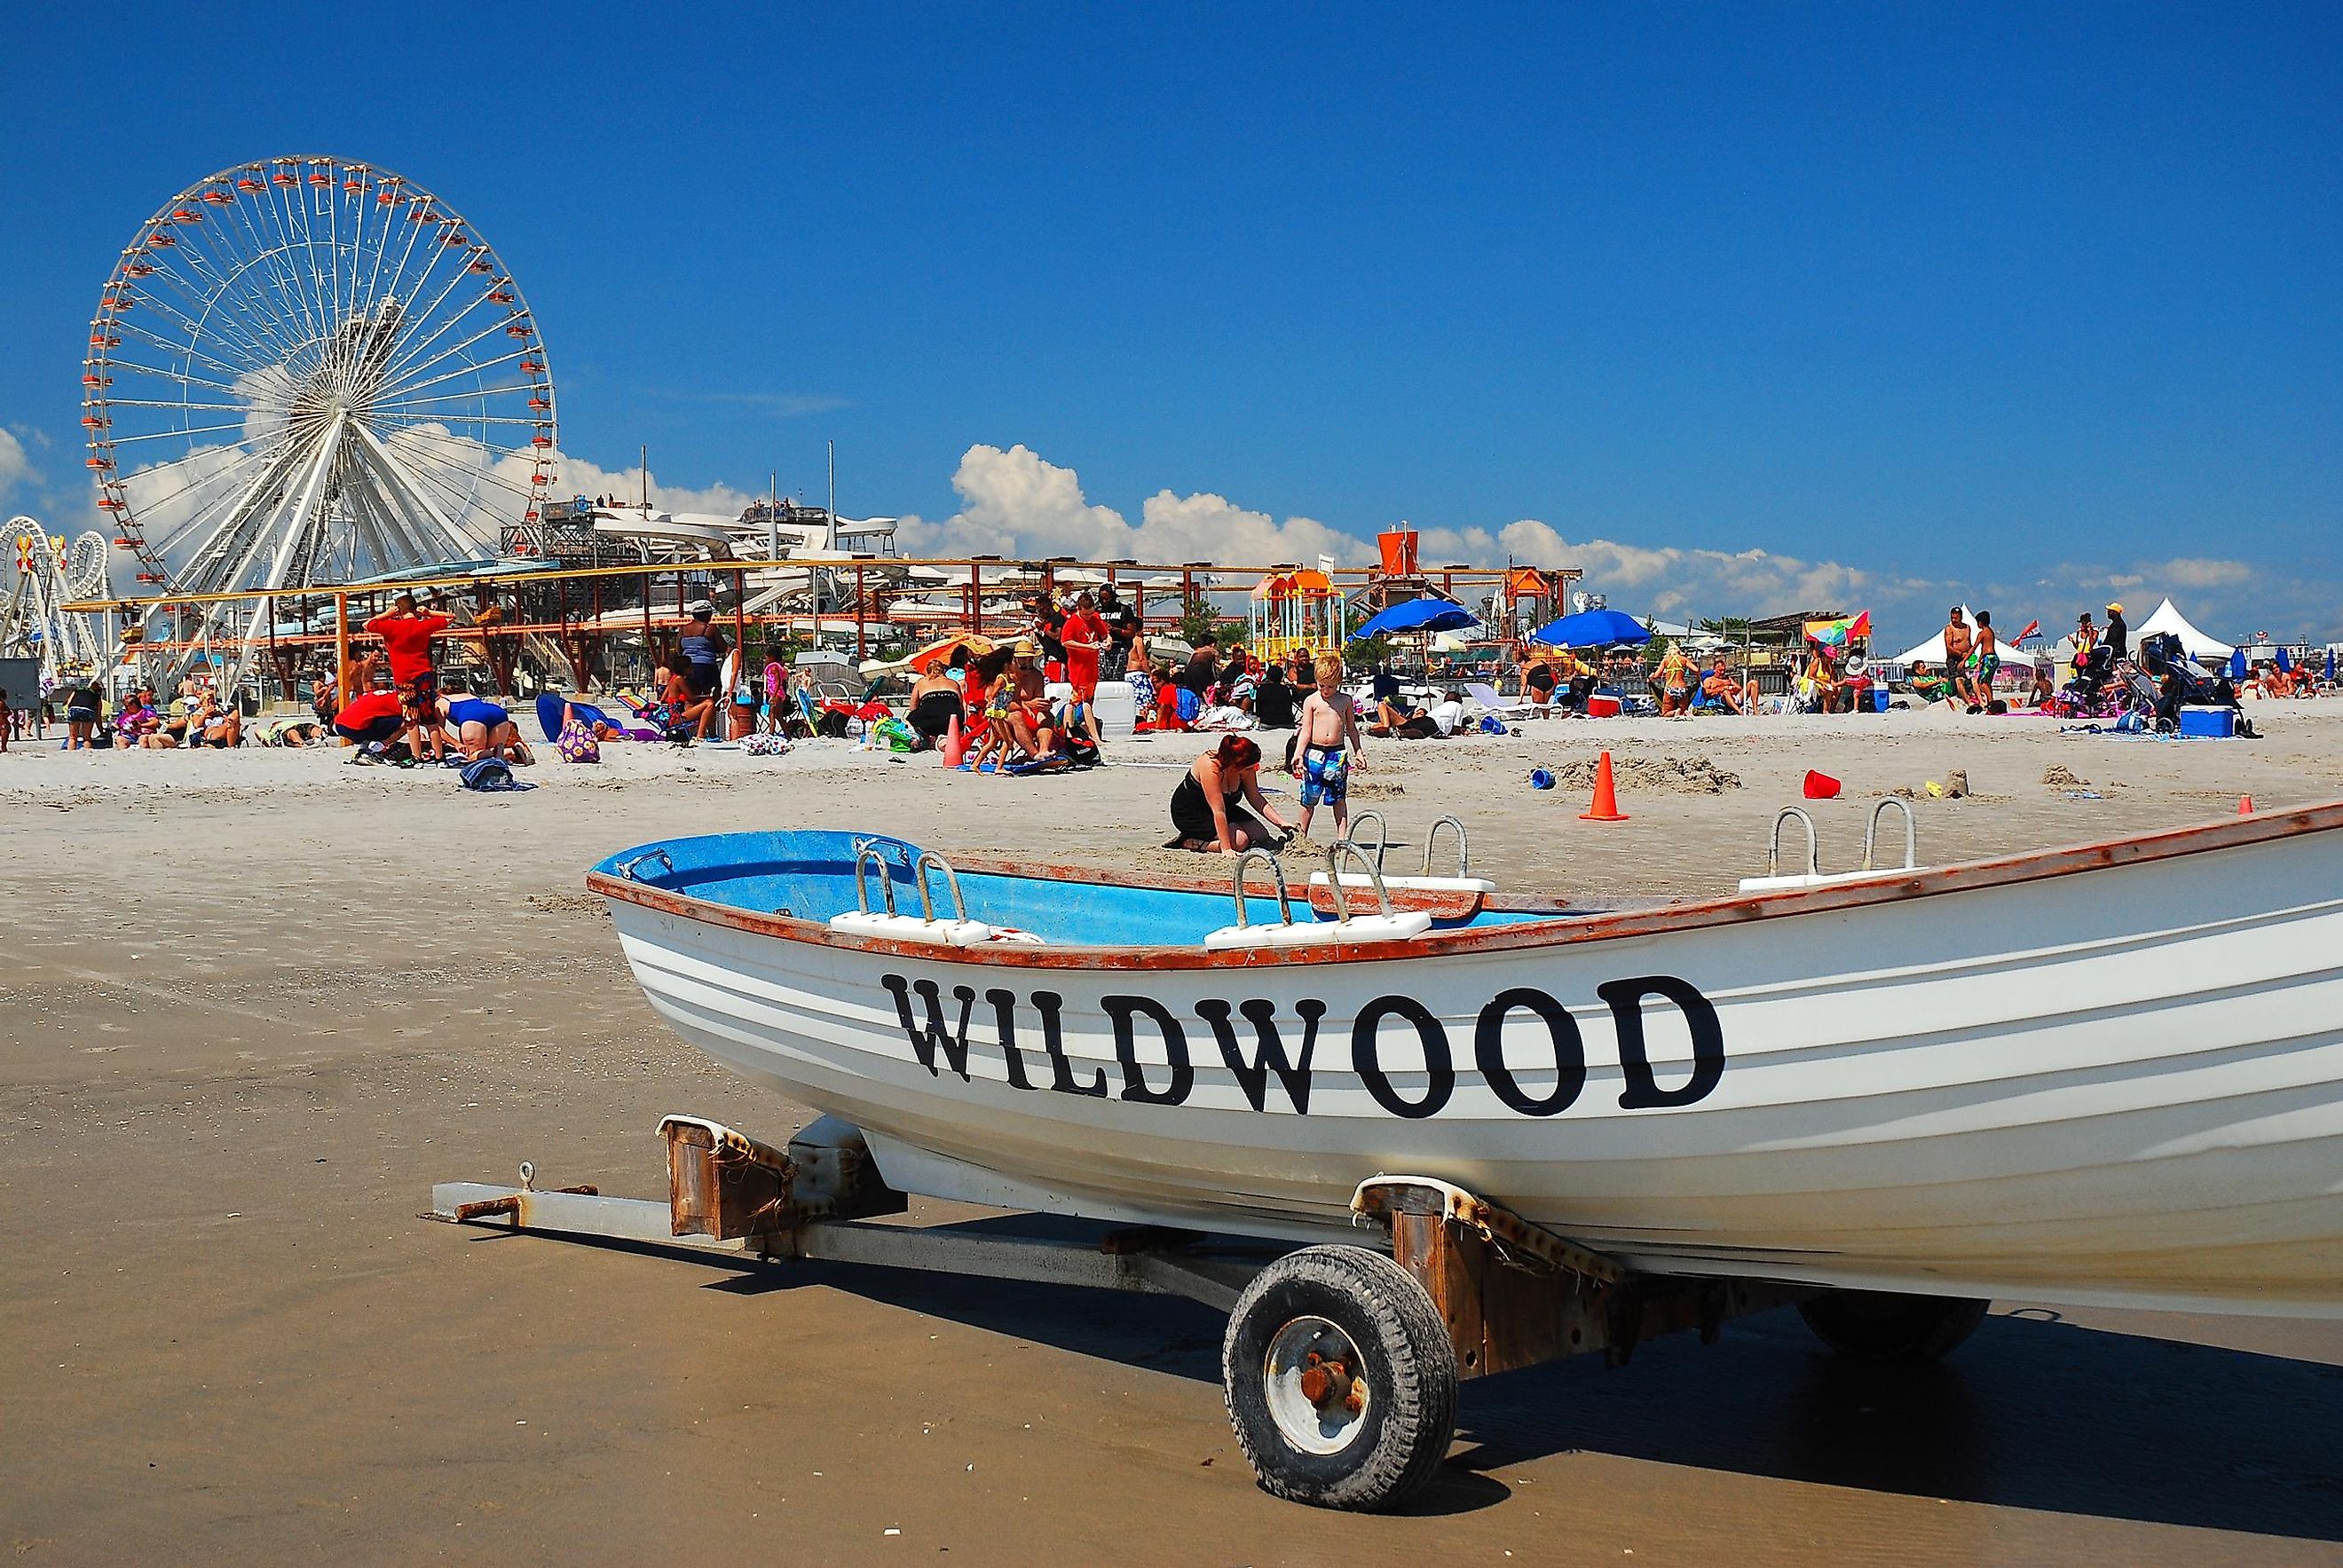 A beautiful day by the beach at Wildwood, New Jersey. Editorial credit: James Kirkikis / Shutterstock.com